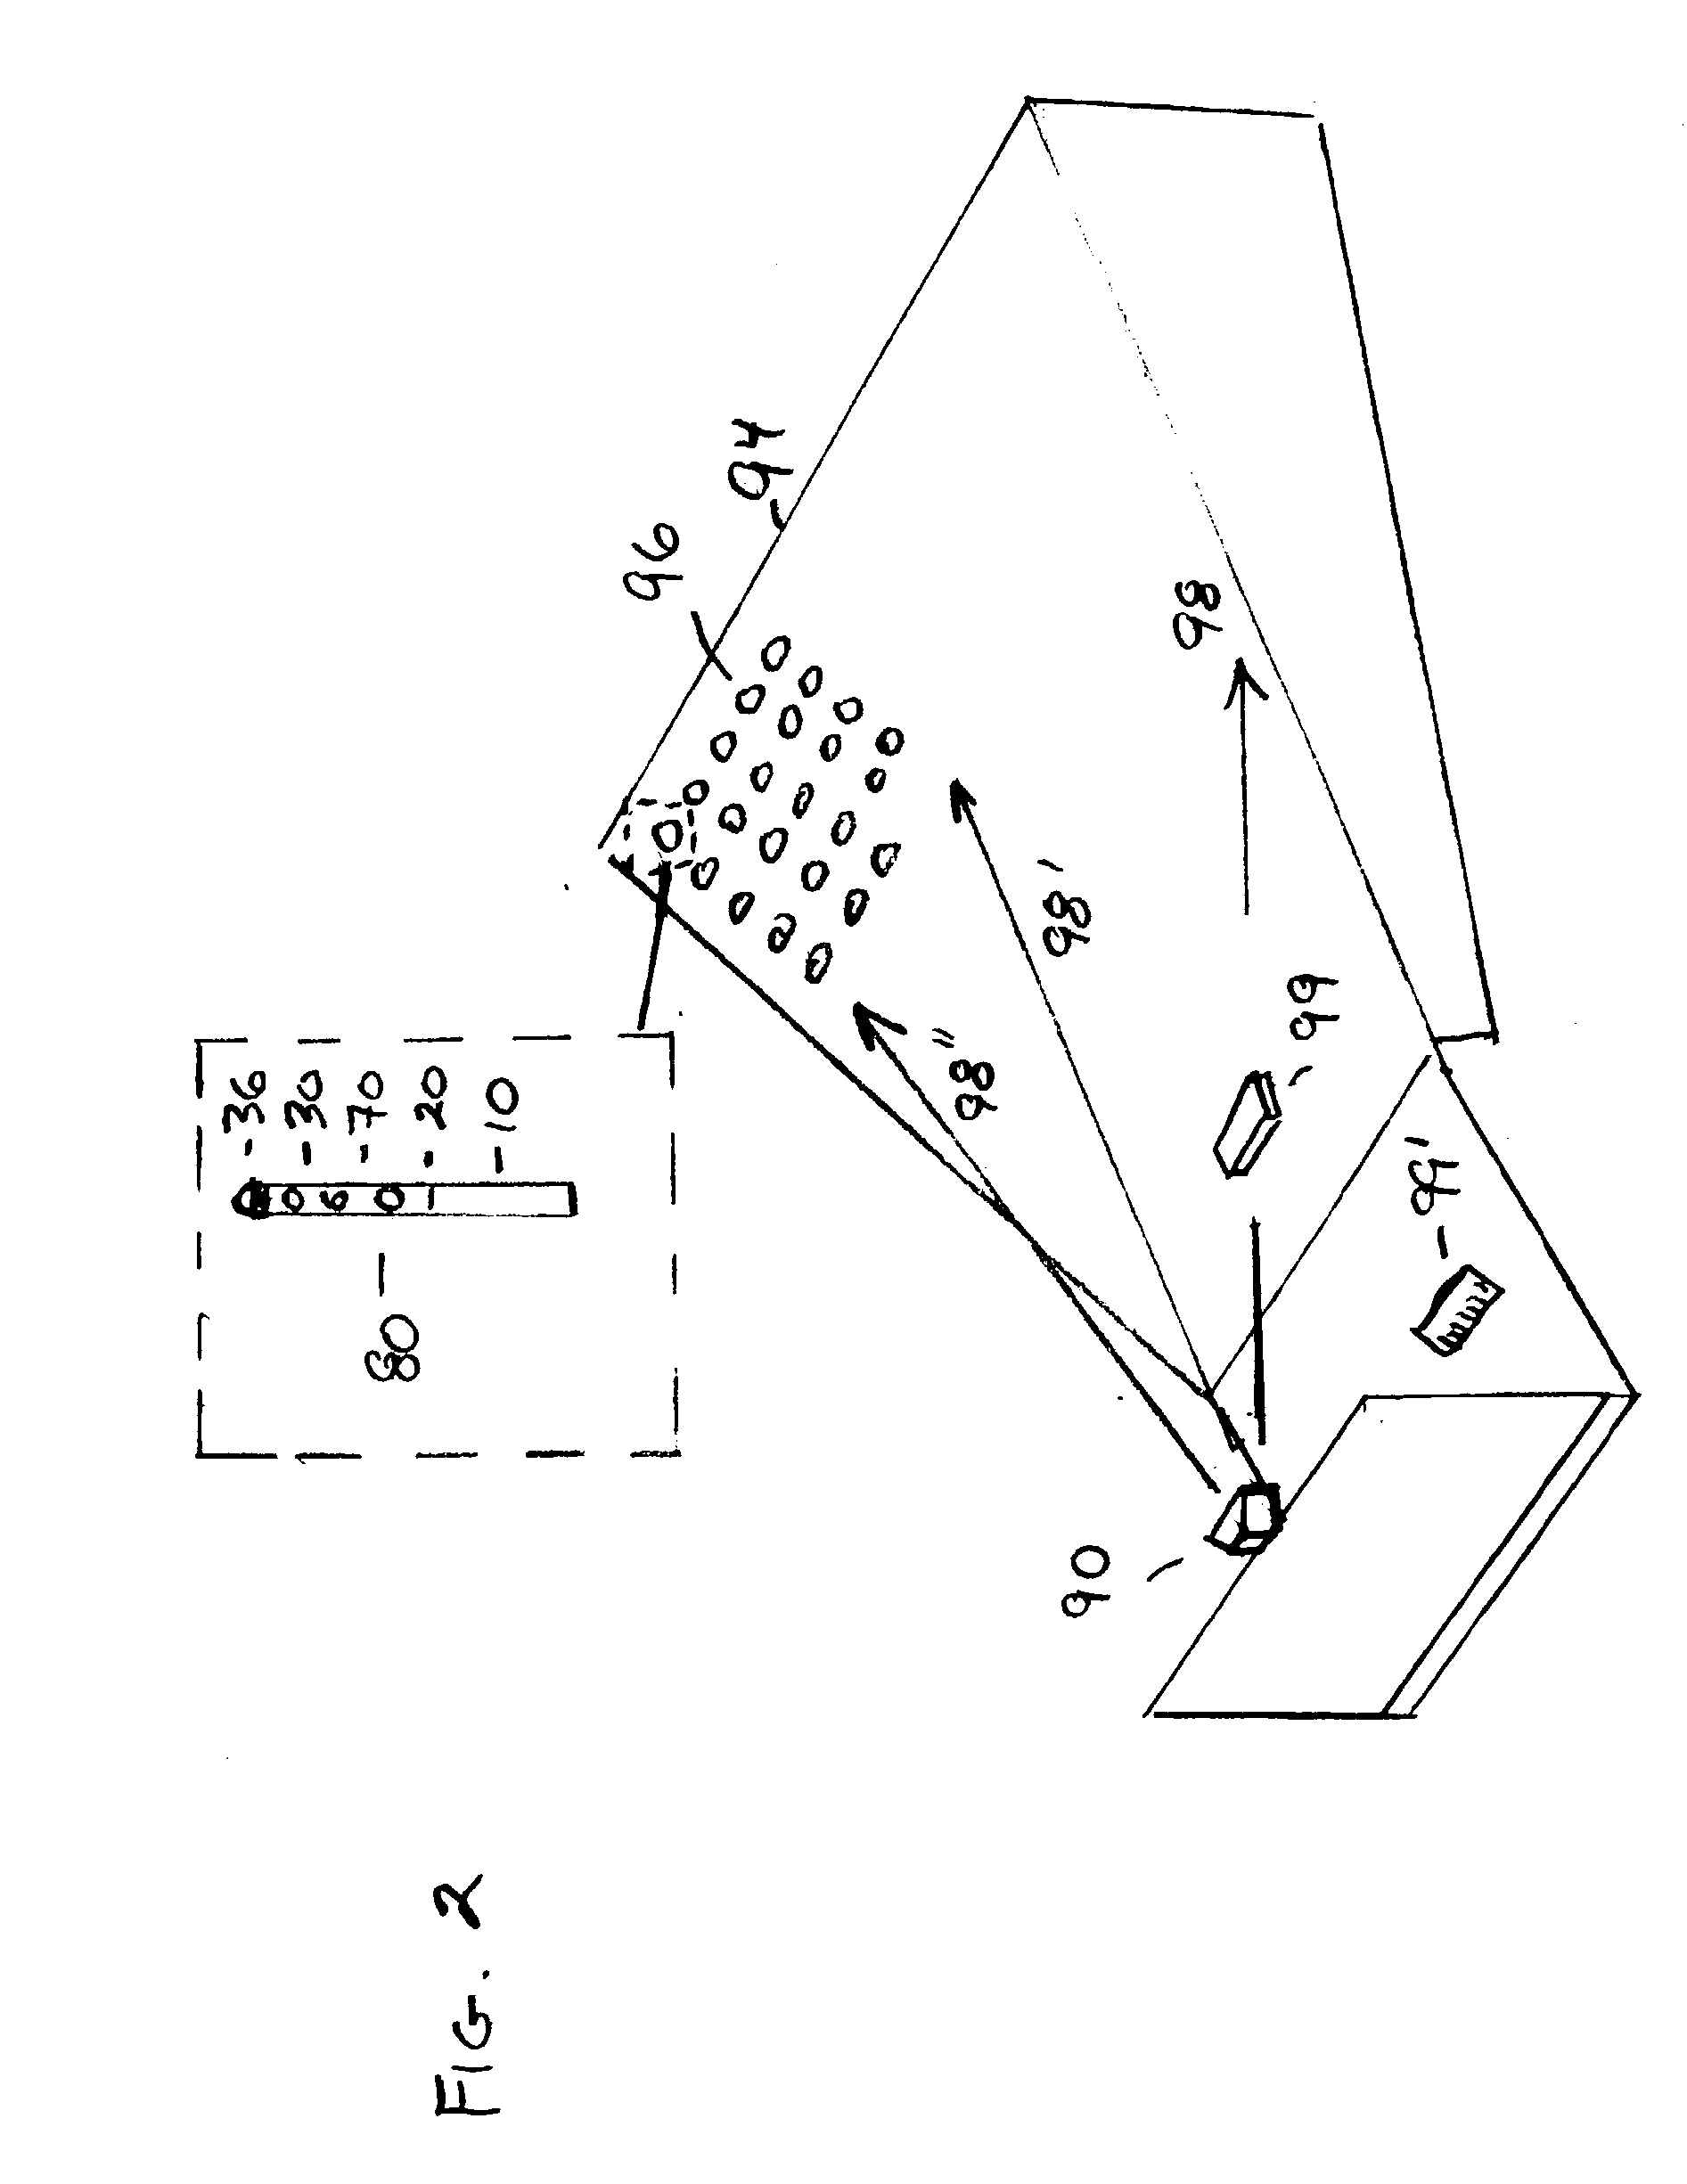 Autostereoscopic performance wand display system